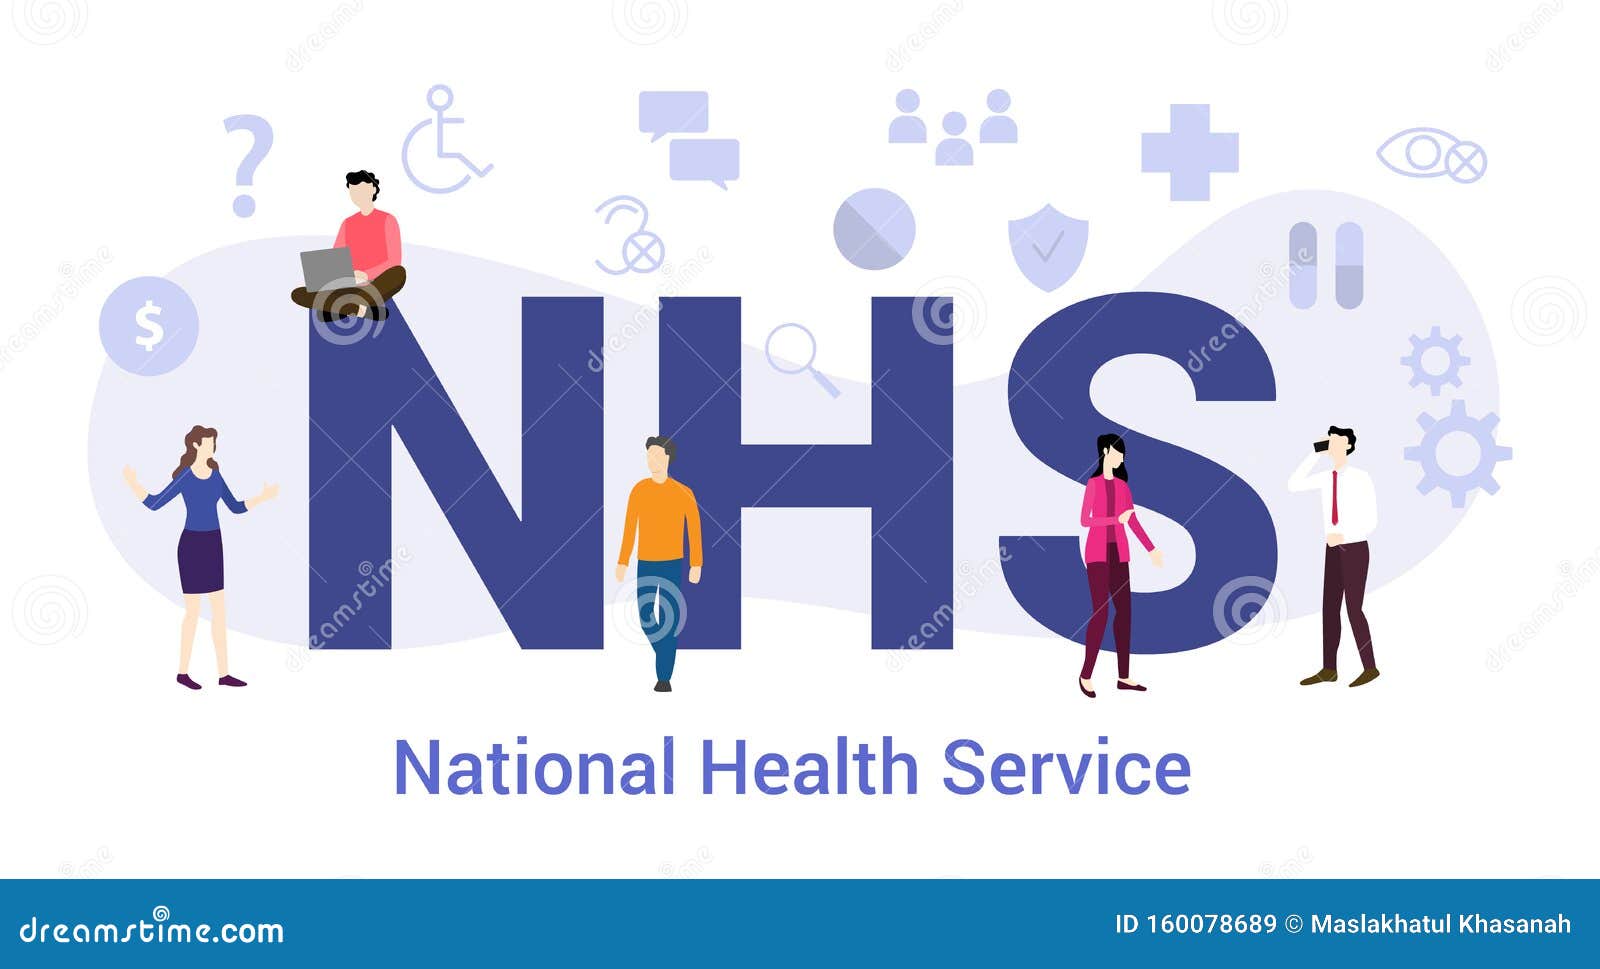 nhs national health service concept with big word or text and team people with modern flat style - 